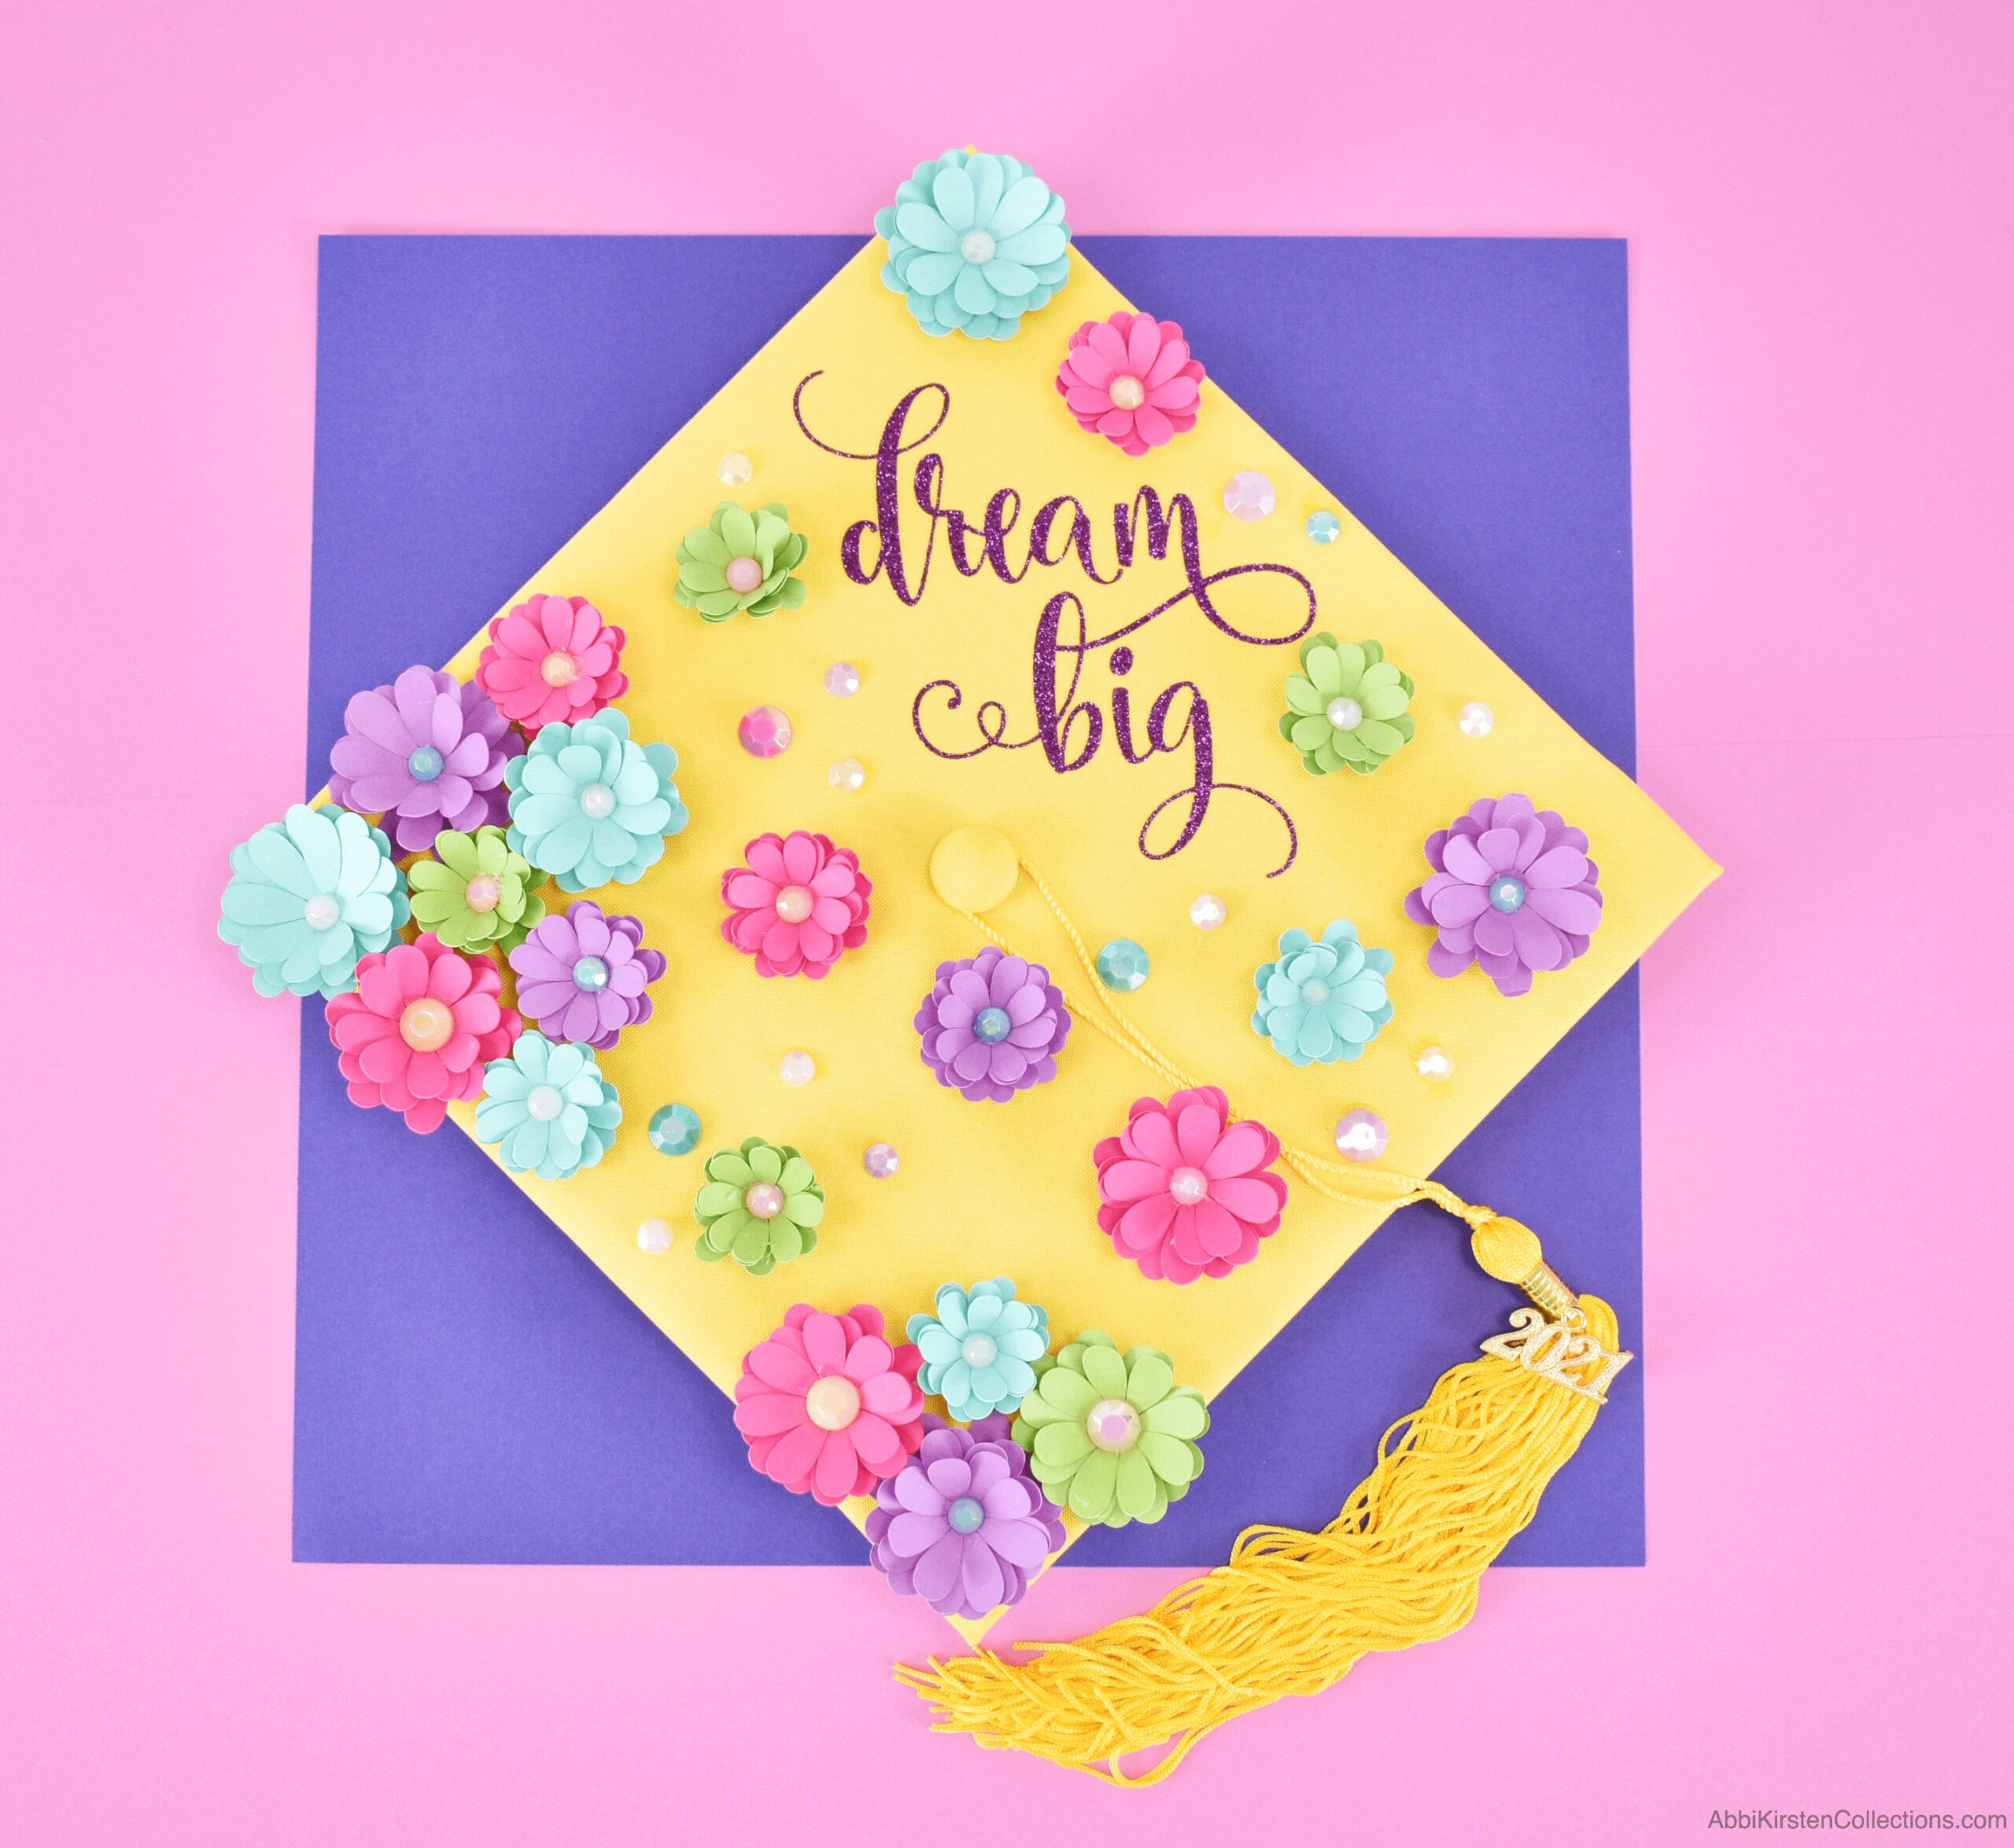 How to Decorate a Graduation Cap with Flowers